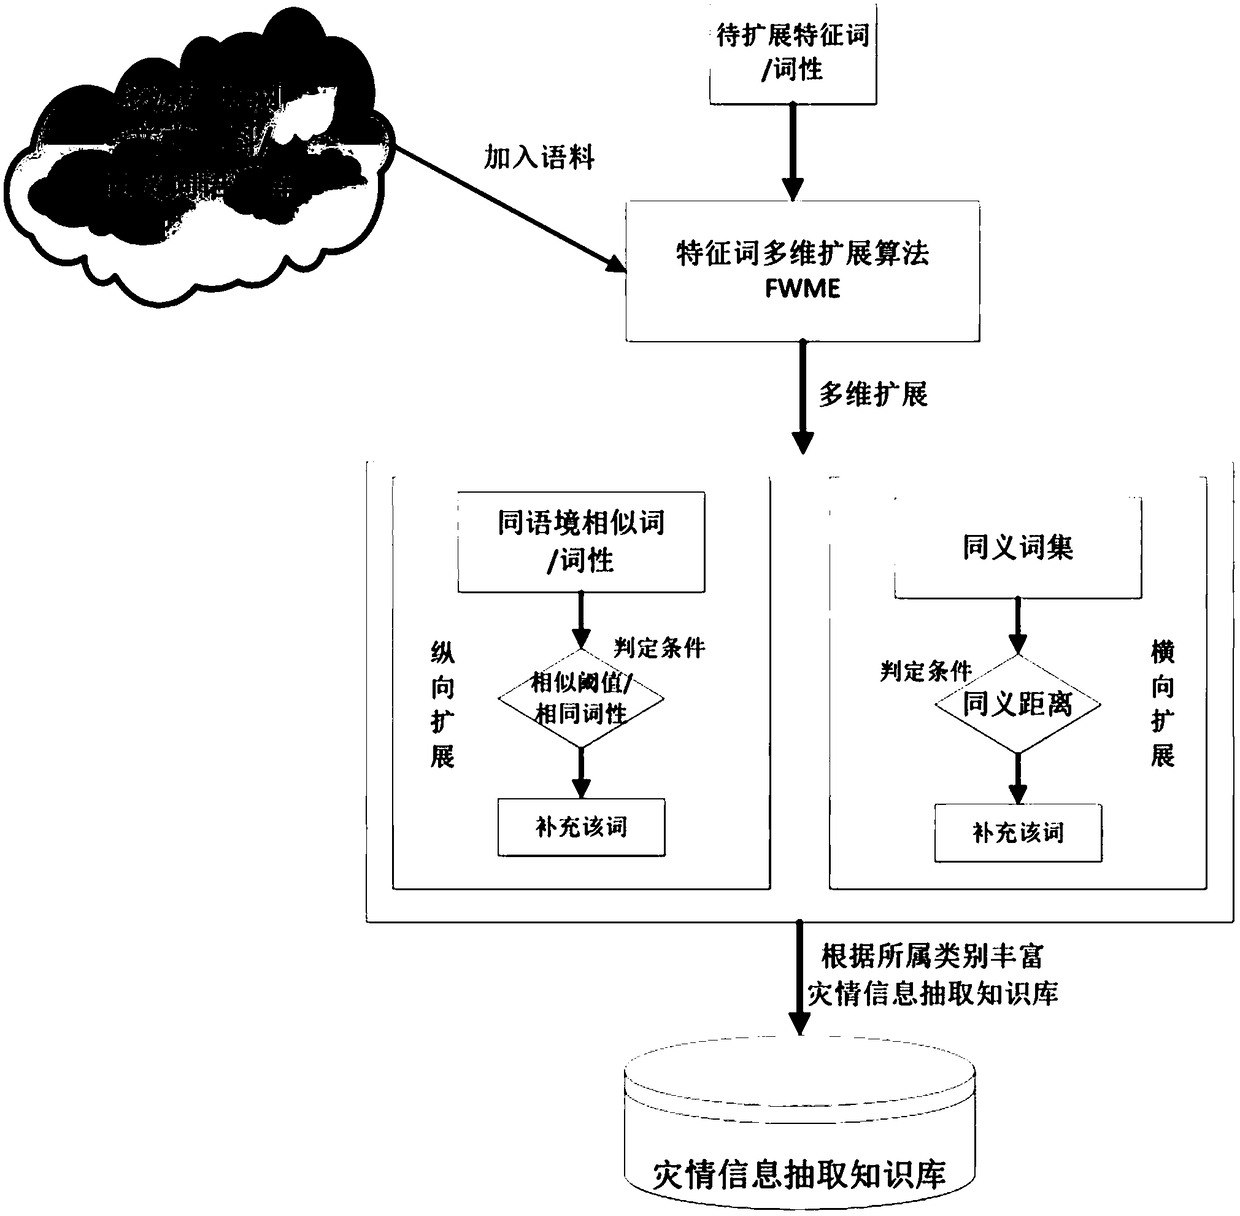 Disaster monitoring and analysis method for extracting internet multidimensional disaster information